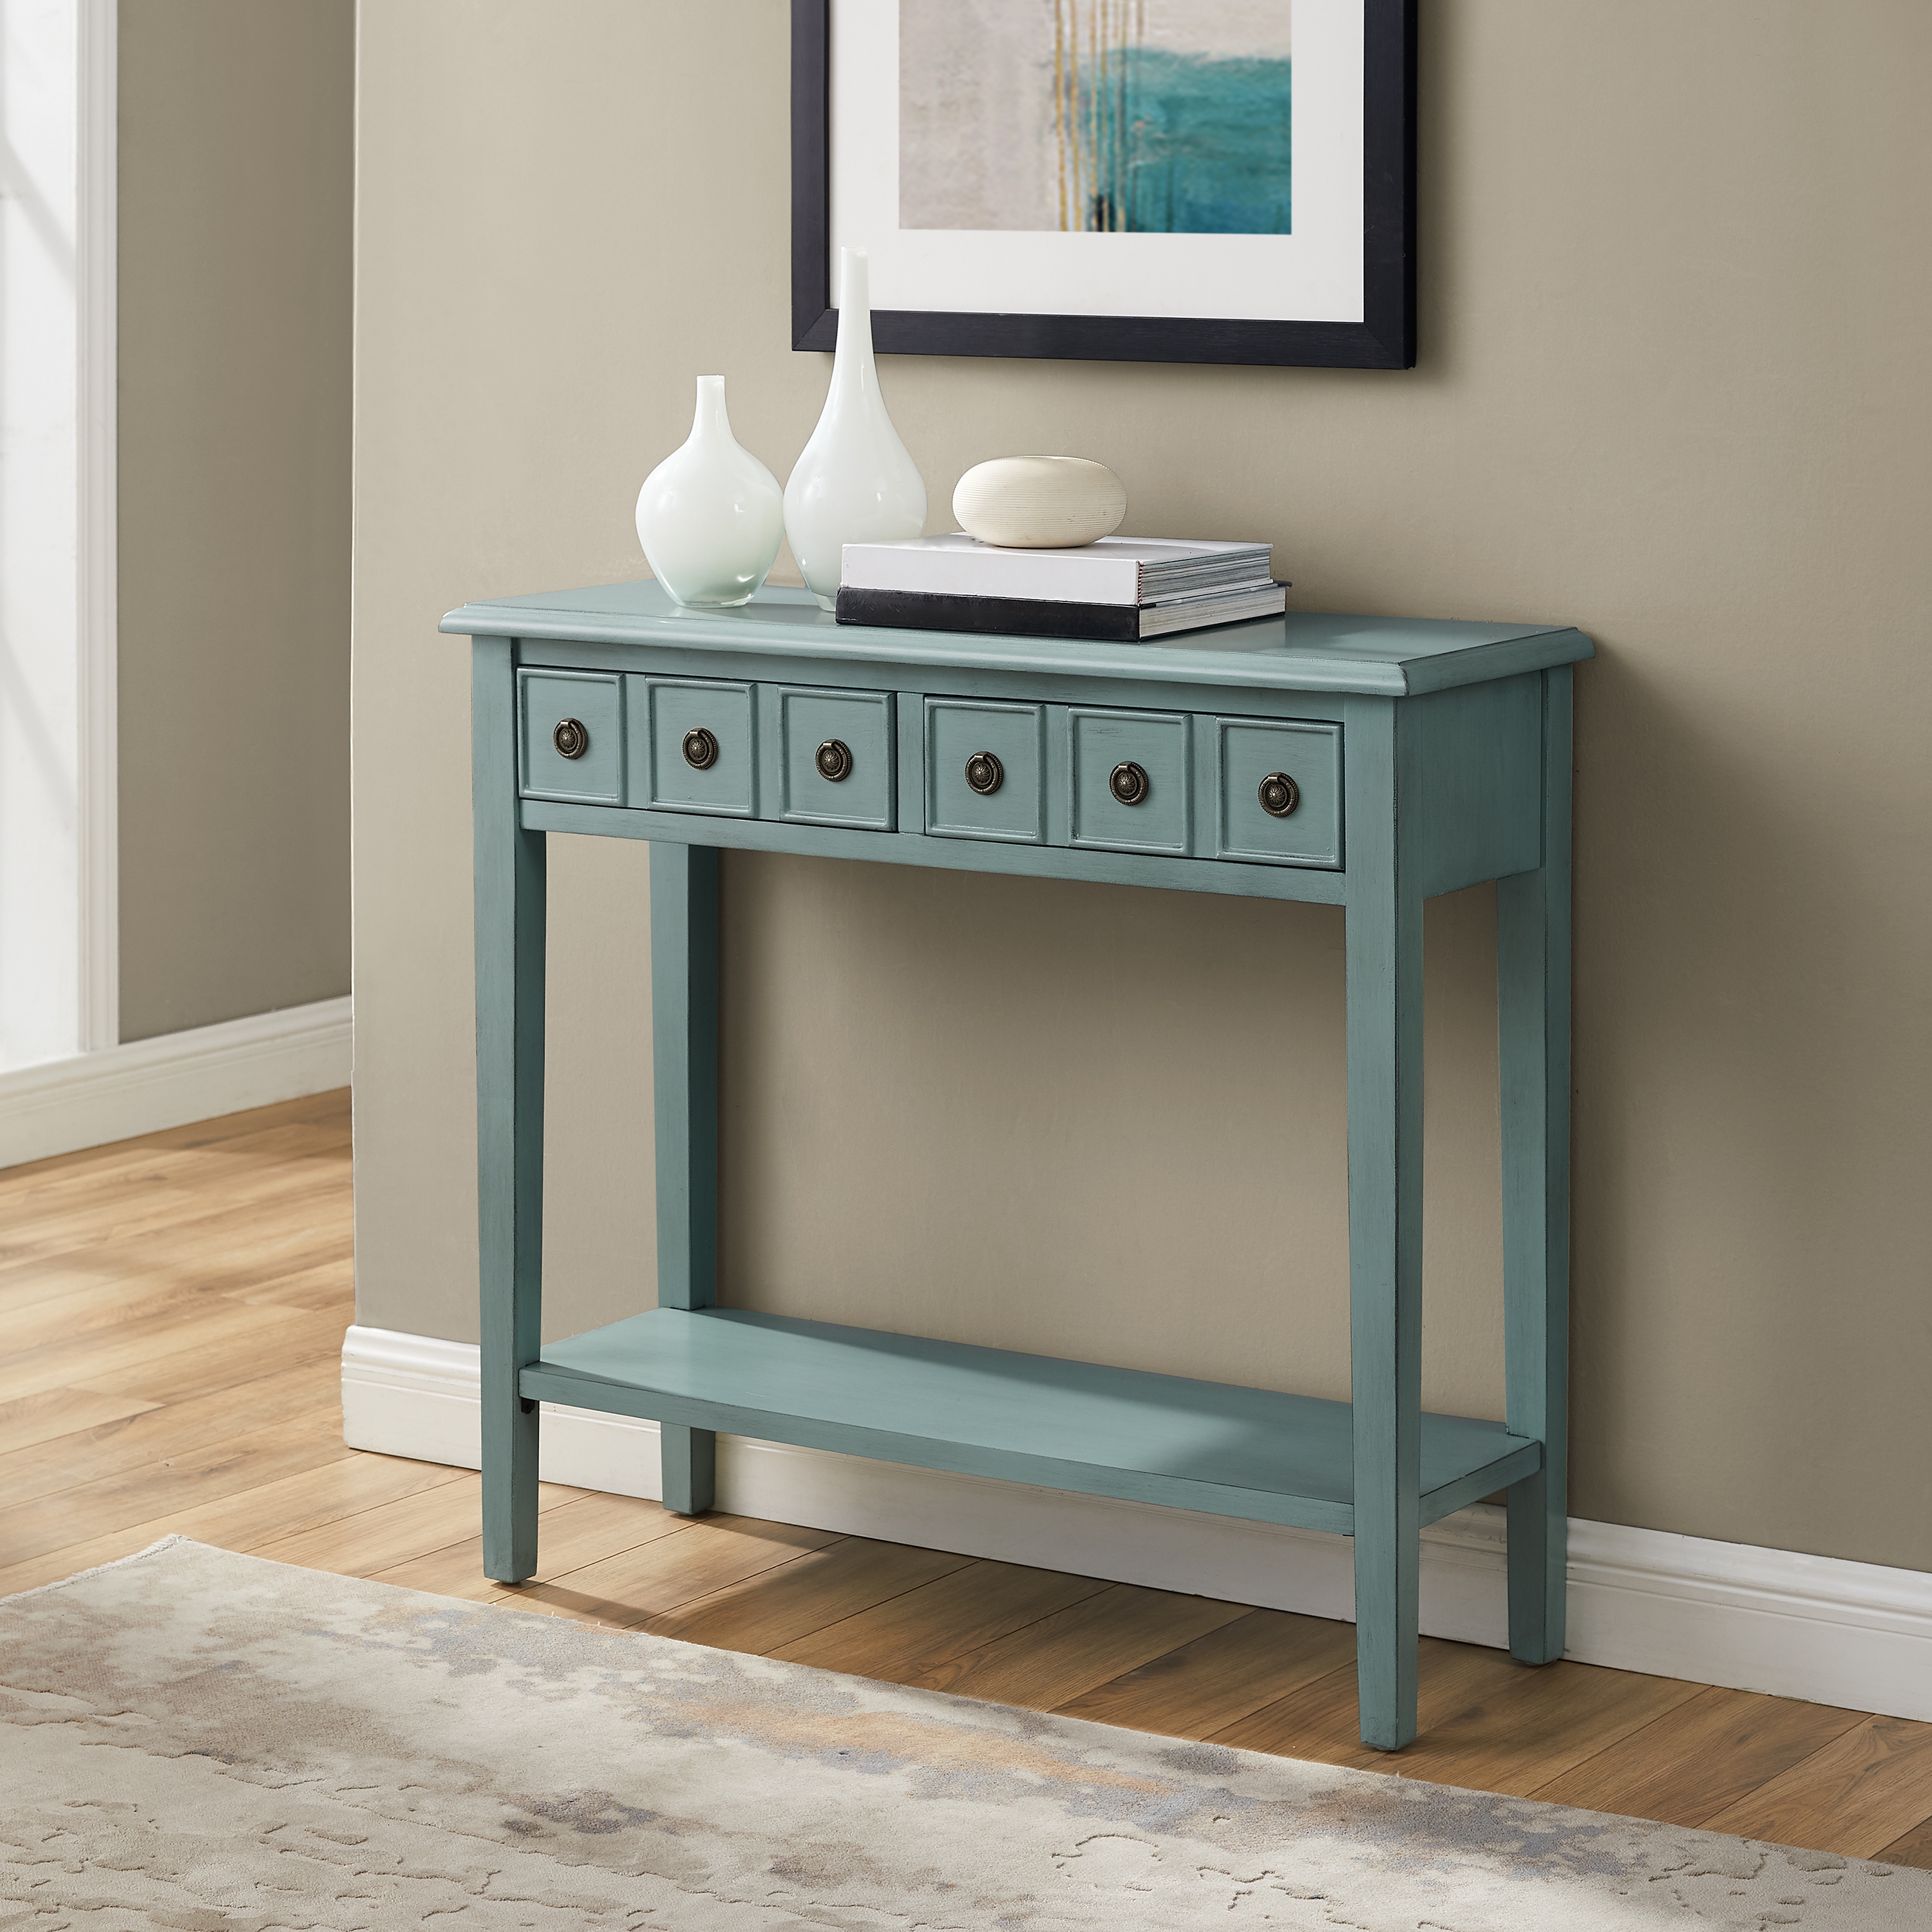 Sadie Farmhouse 2-Drawer Short Console Table with Shelf, Teal - image 3 of 14